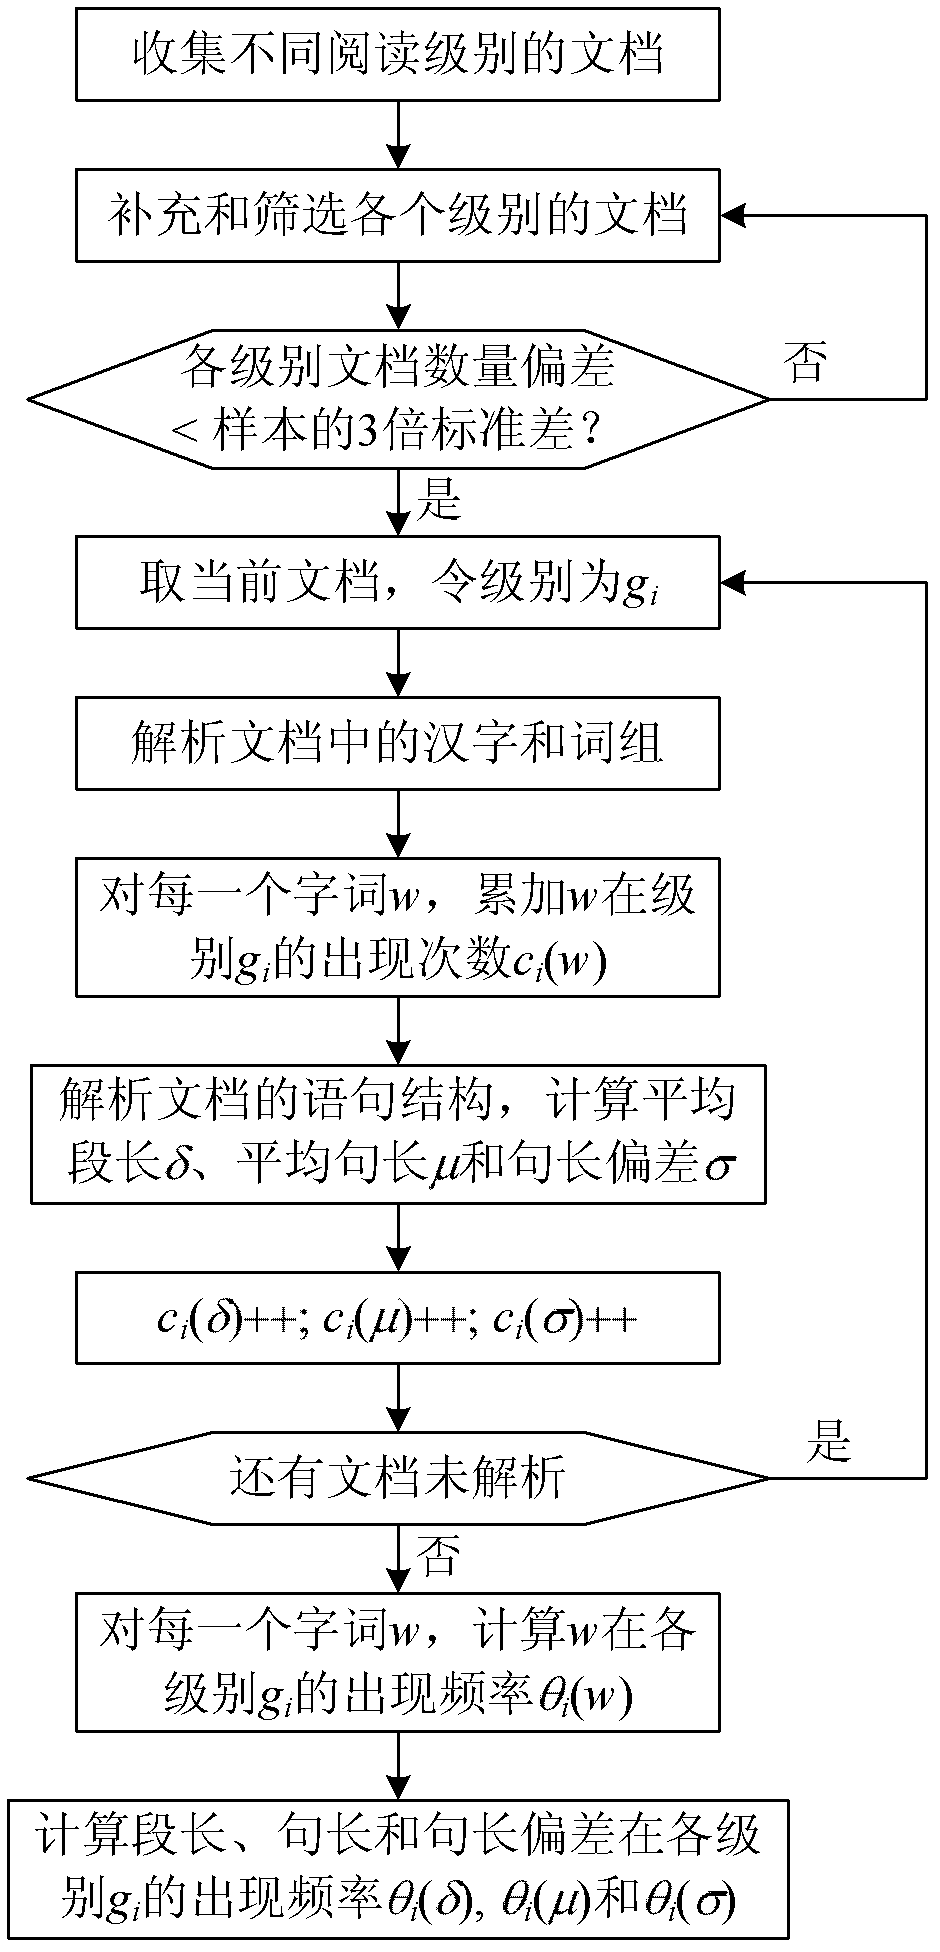 Method for grading Chinese electronic document reading on the Internet